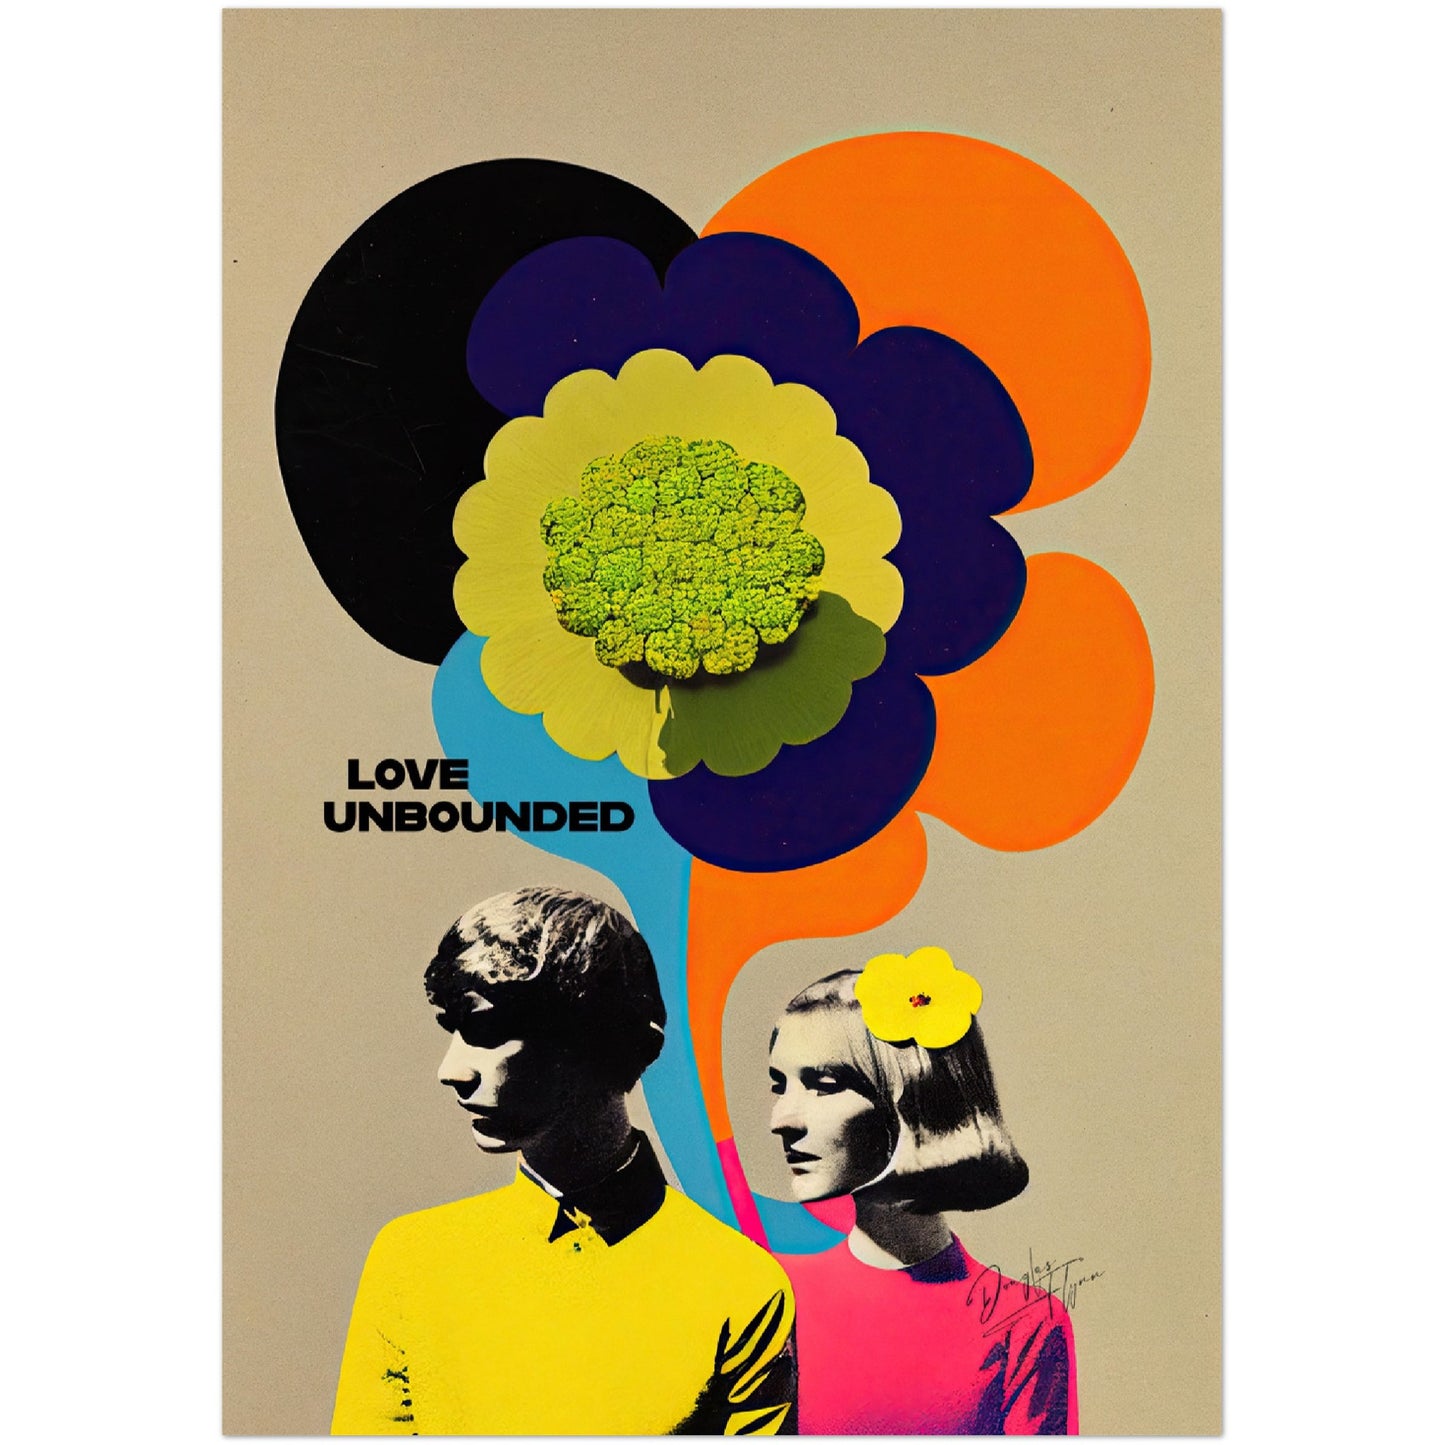 »Love Unbounded«retro poster